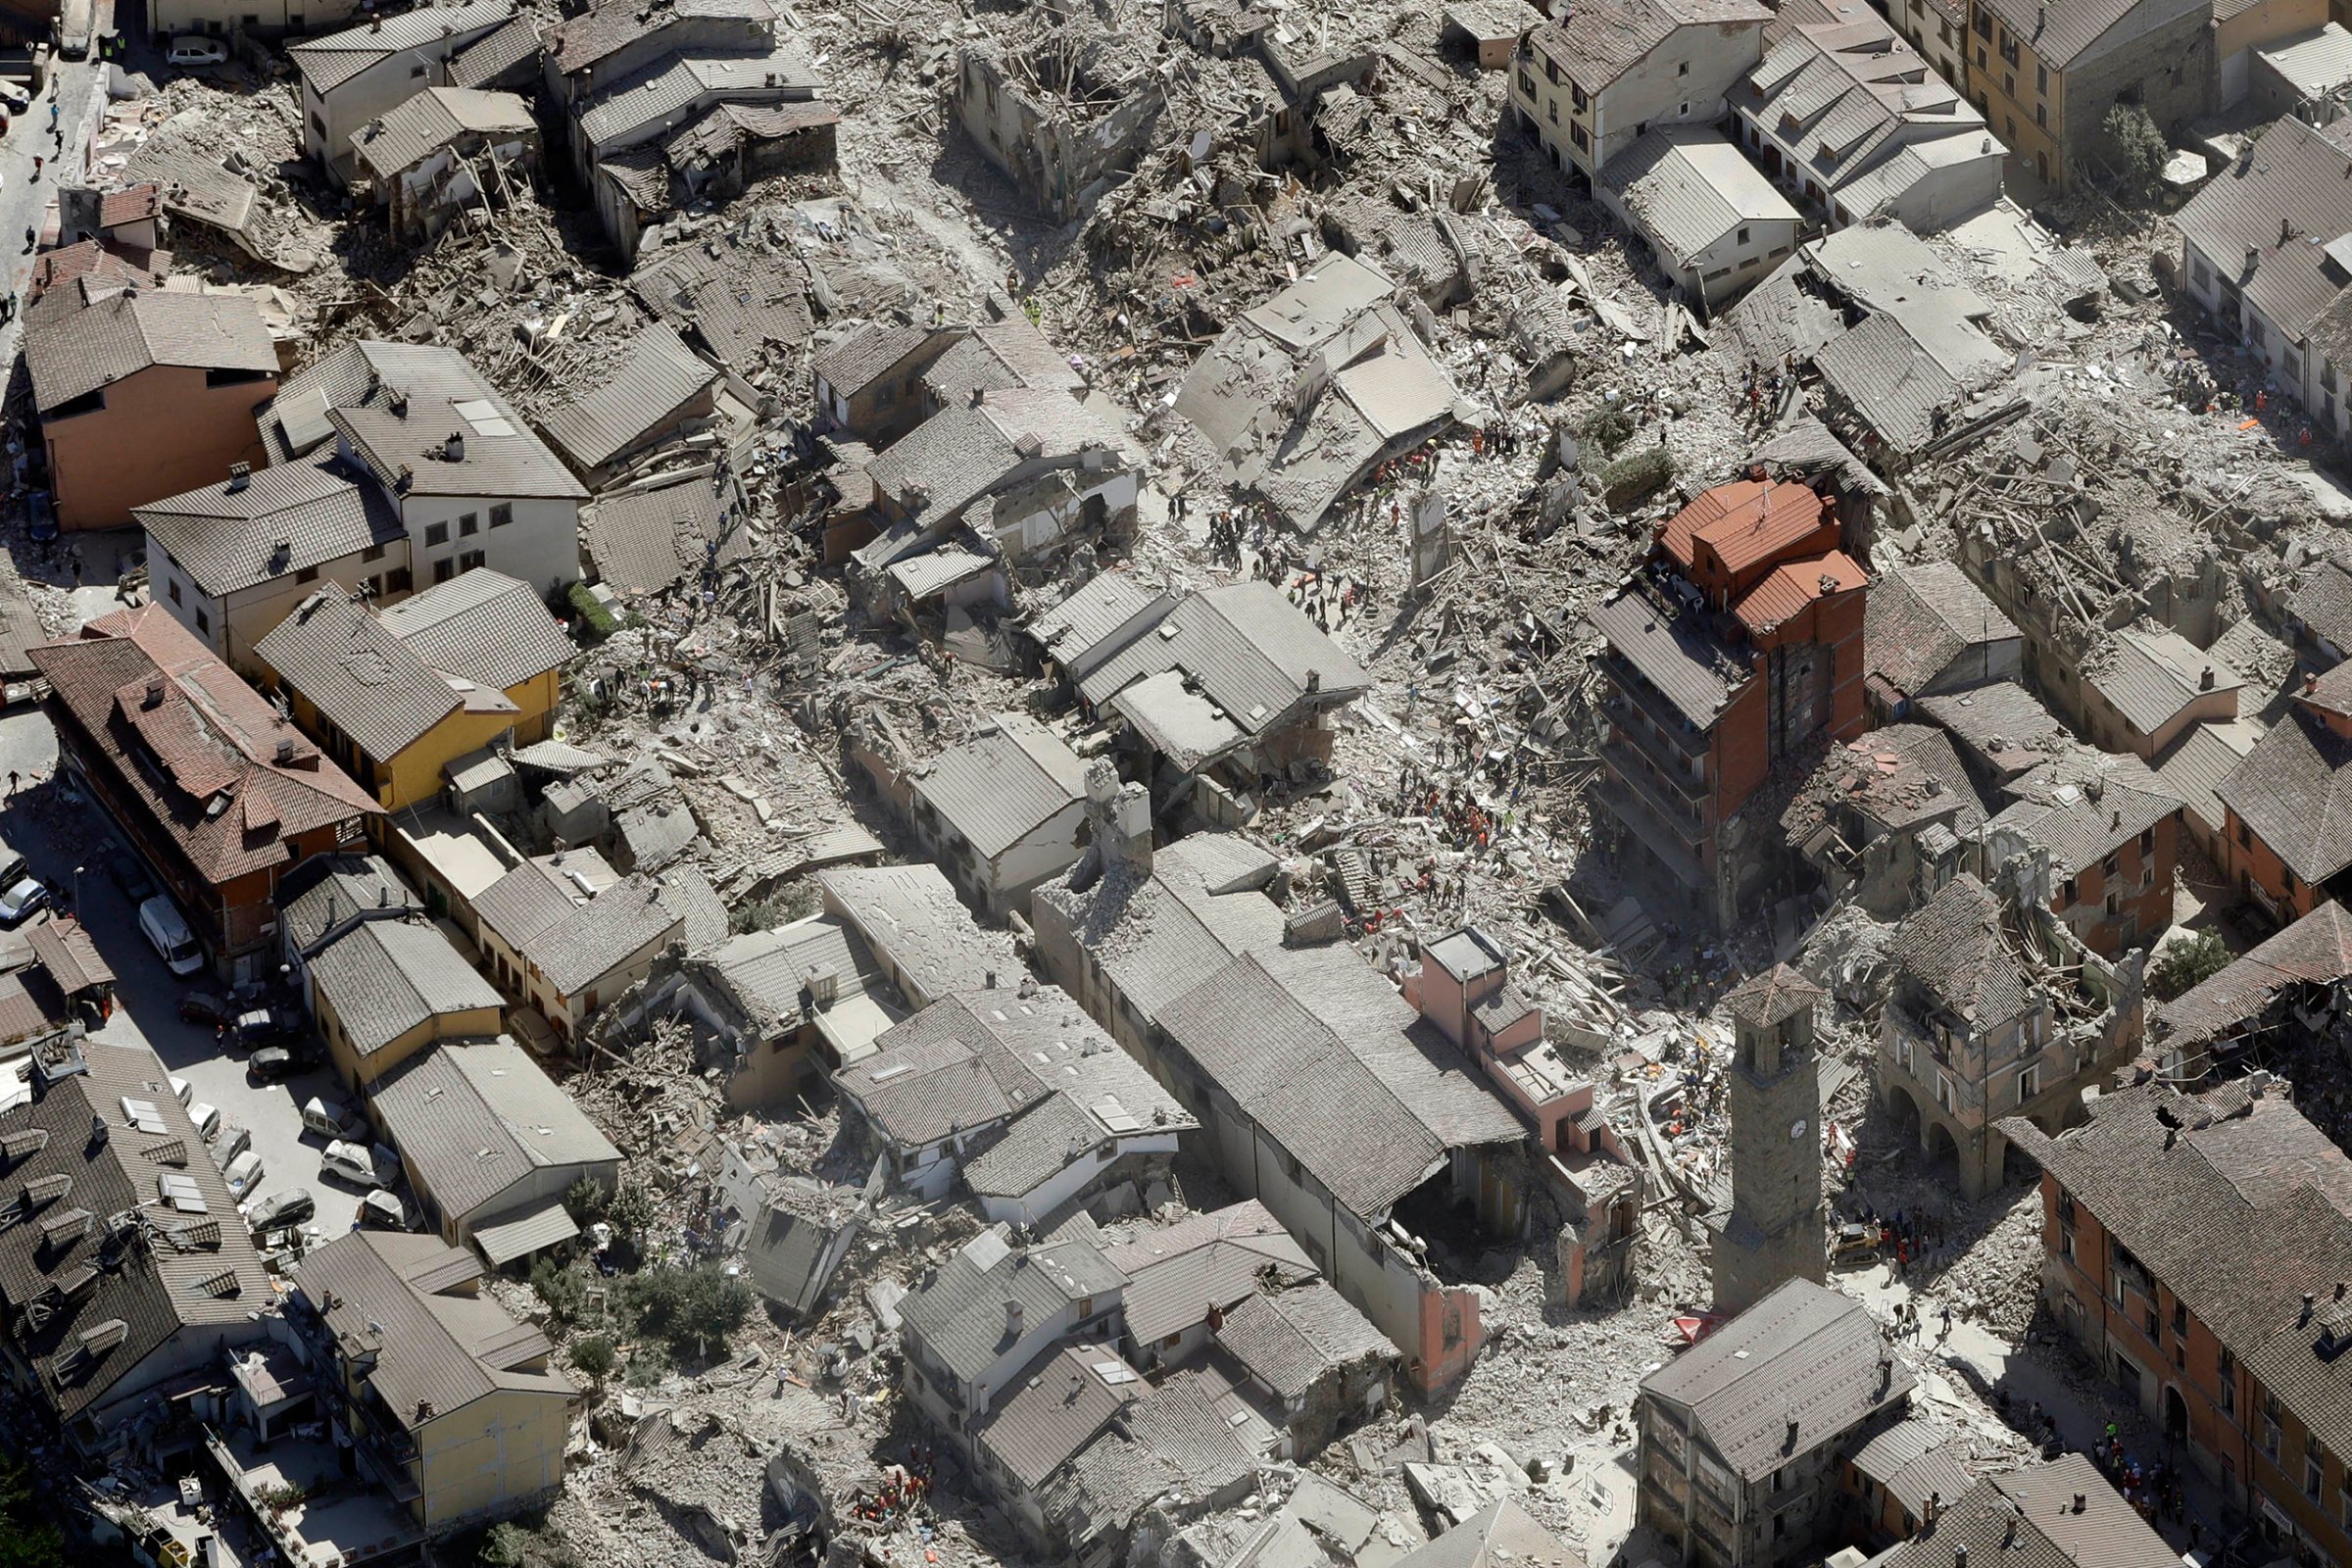 An overhead view of Amatrice after a powerful earthquake in central Italy on Aug. 24, 2016.